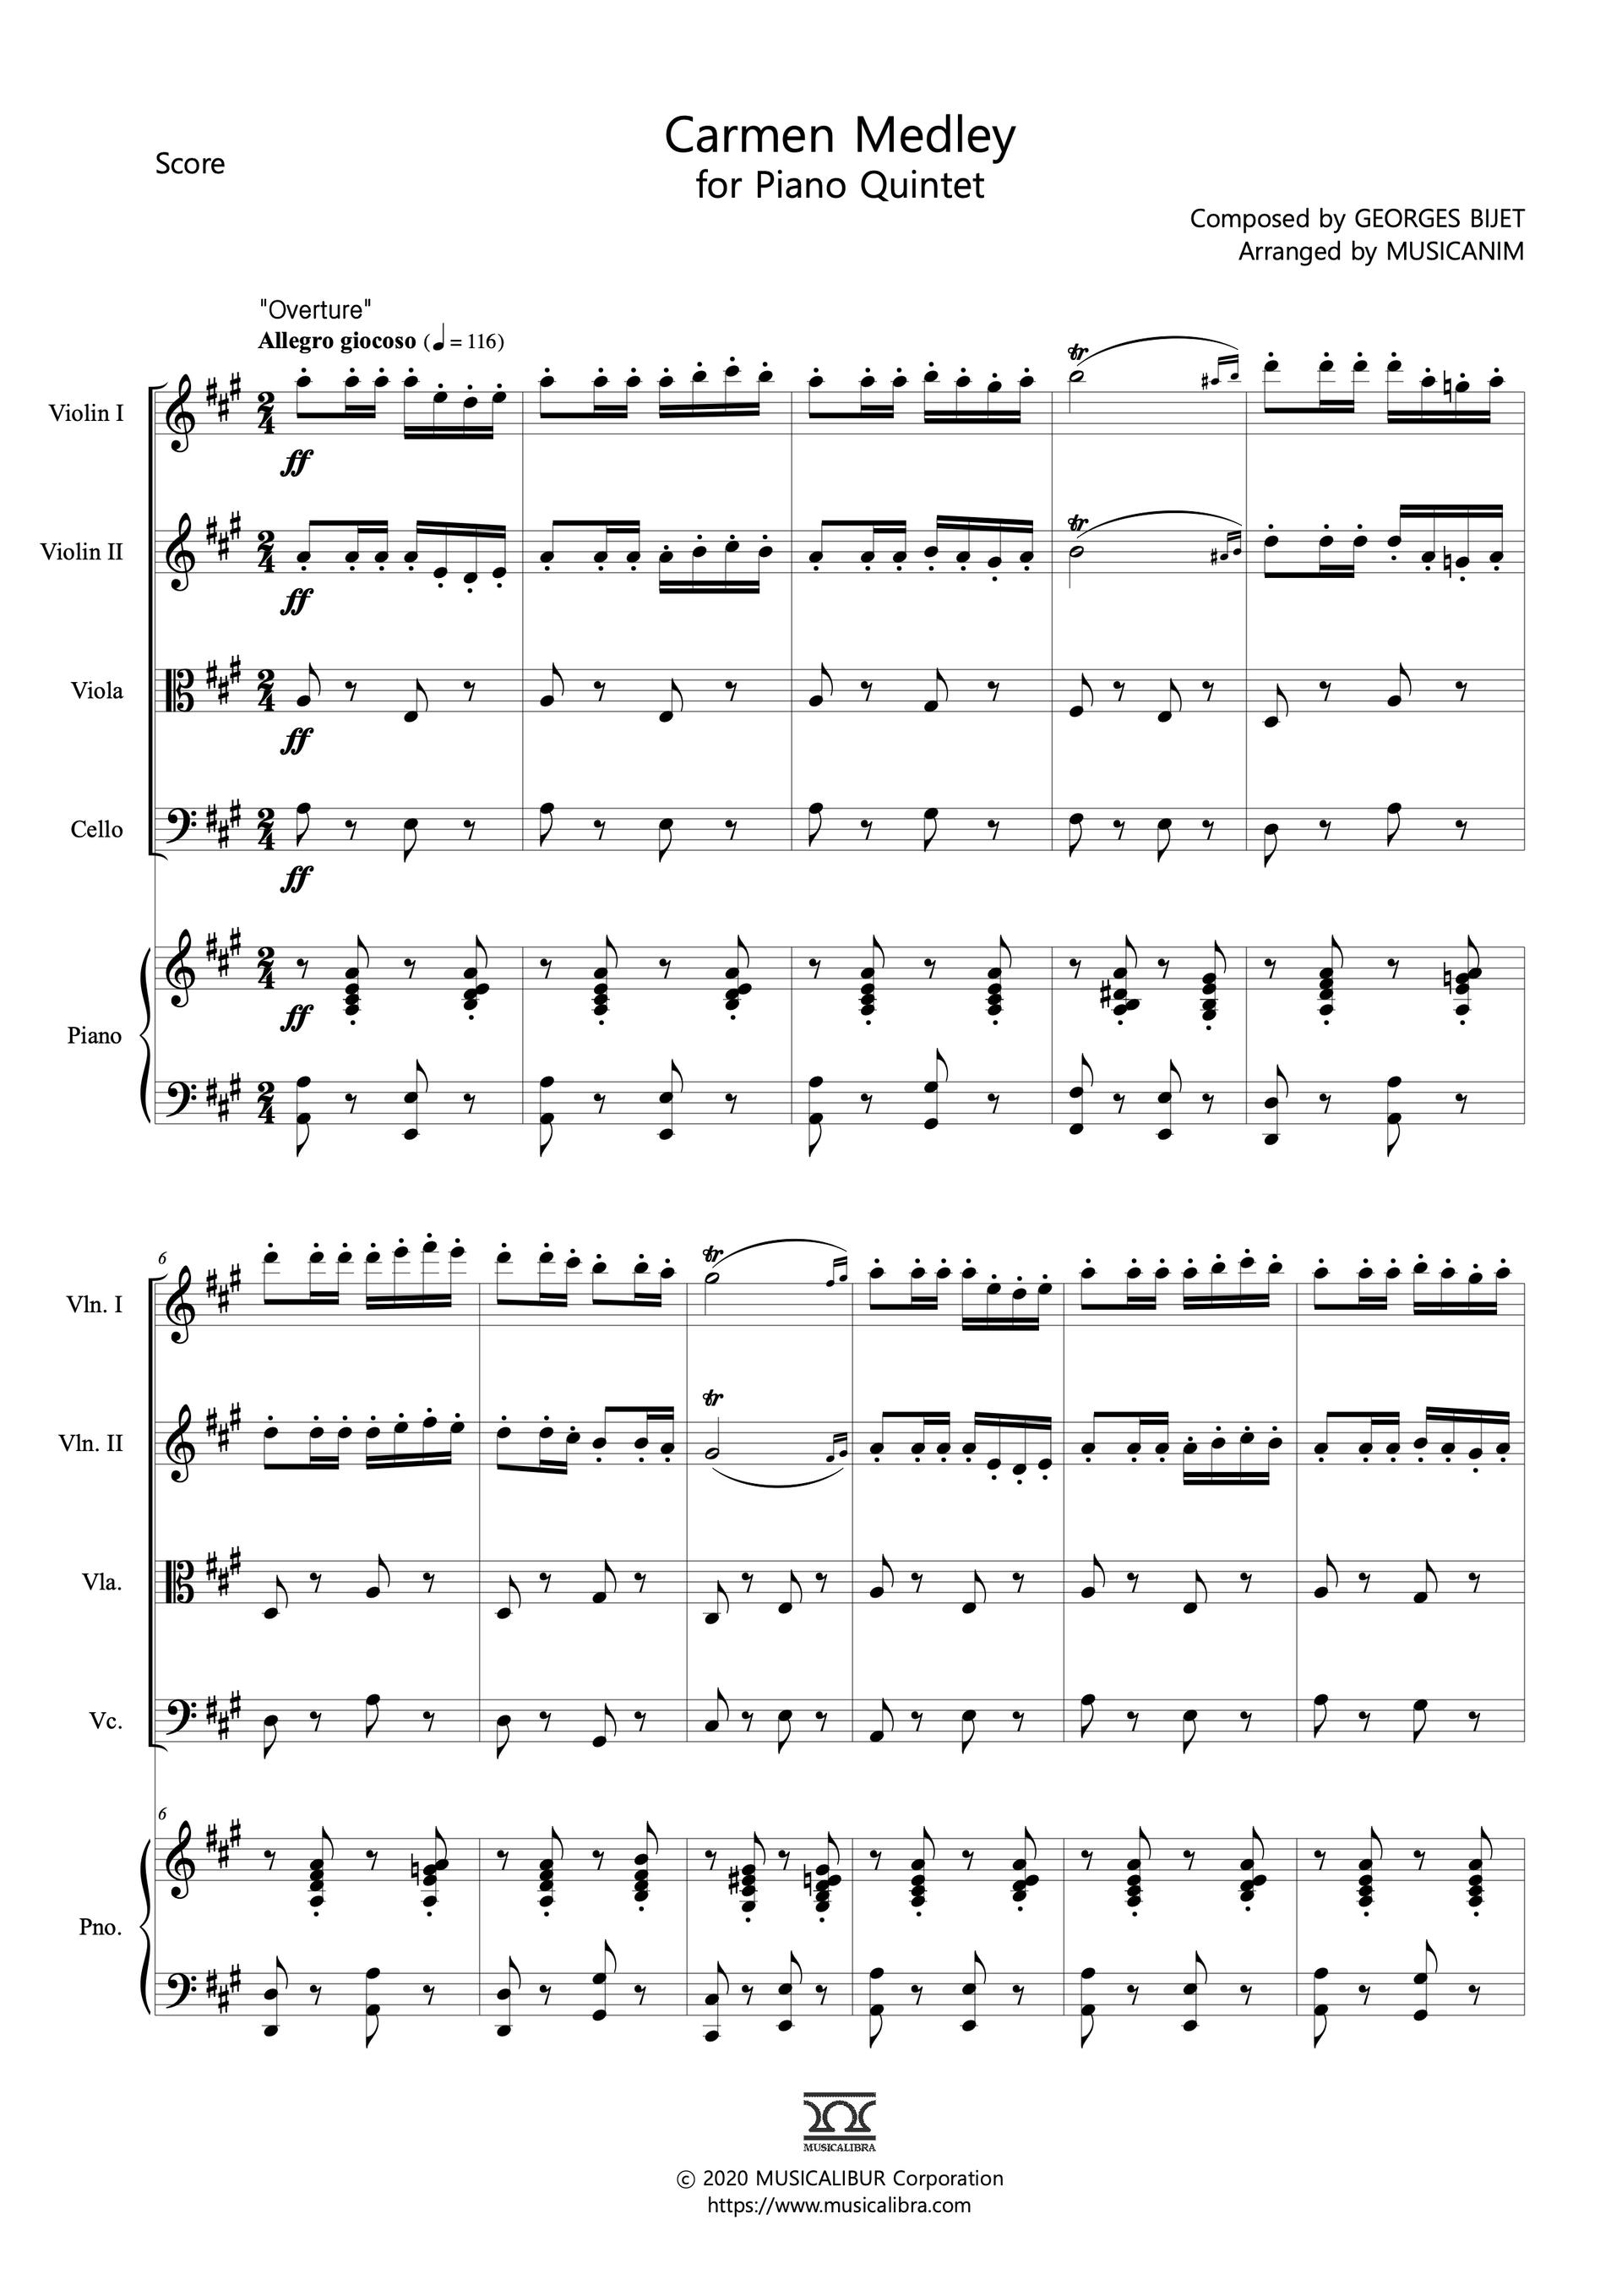 Sheet music of Carmen Medley arranged for violins, viola, cello and piano quintet preview page 1